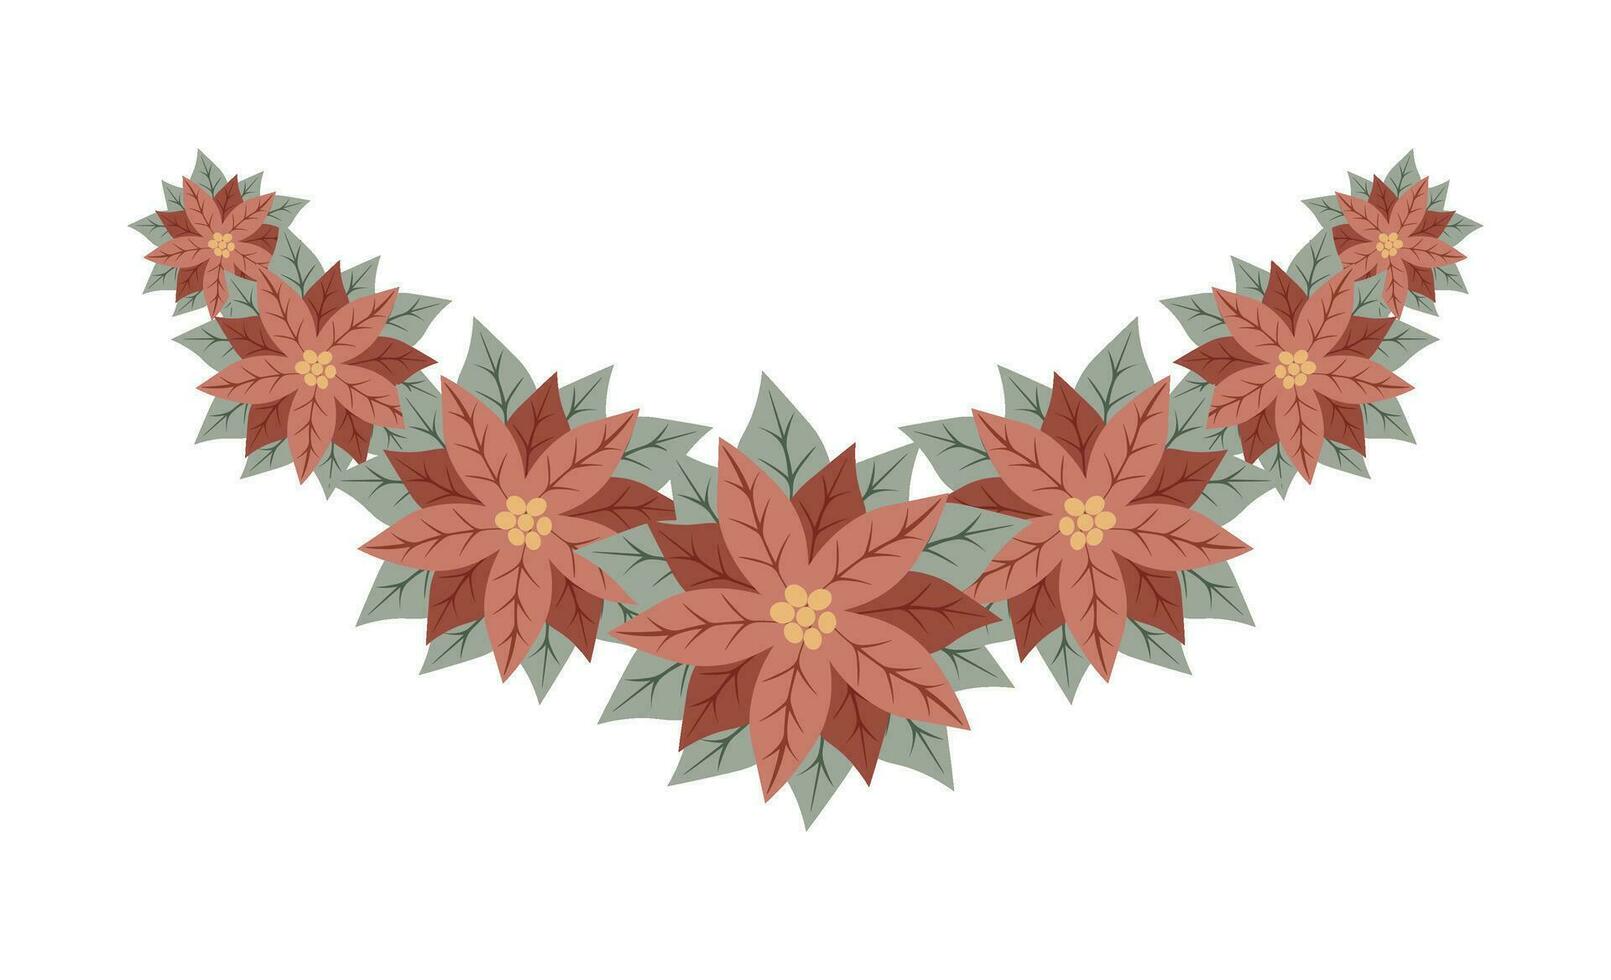 Decorative branch of red poinsettia flowers. Isolated floral New Year and Christmas decor for greeting card, invitation, holiday design vector